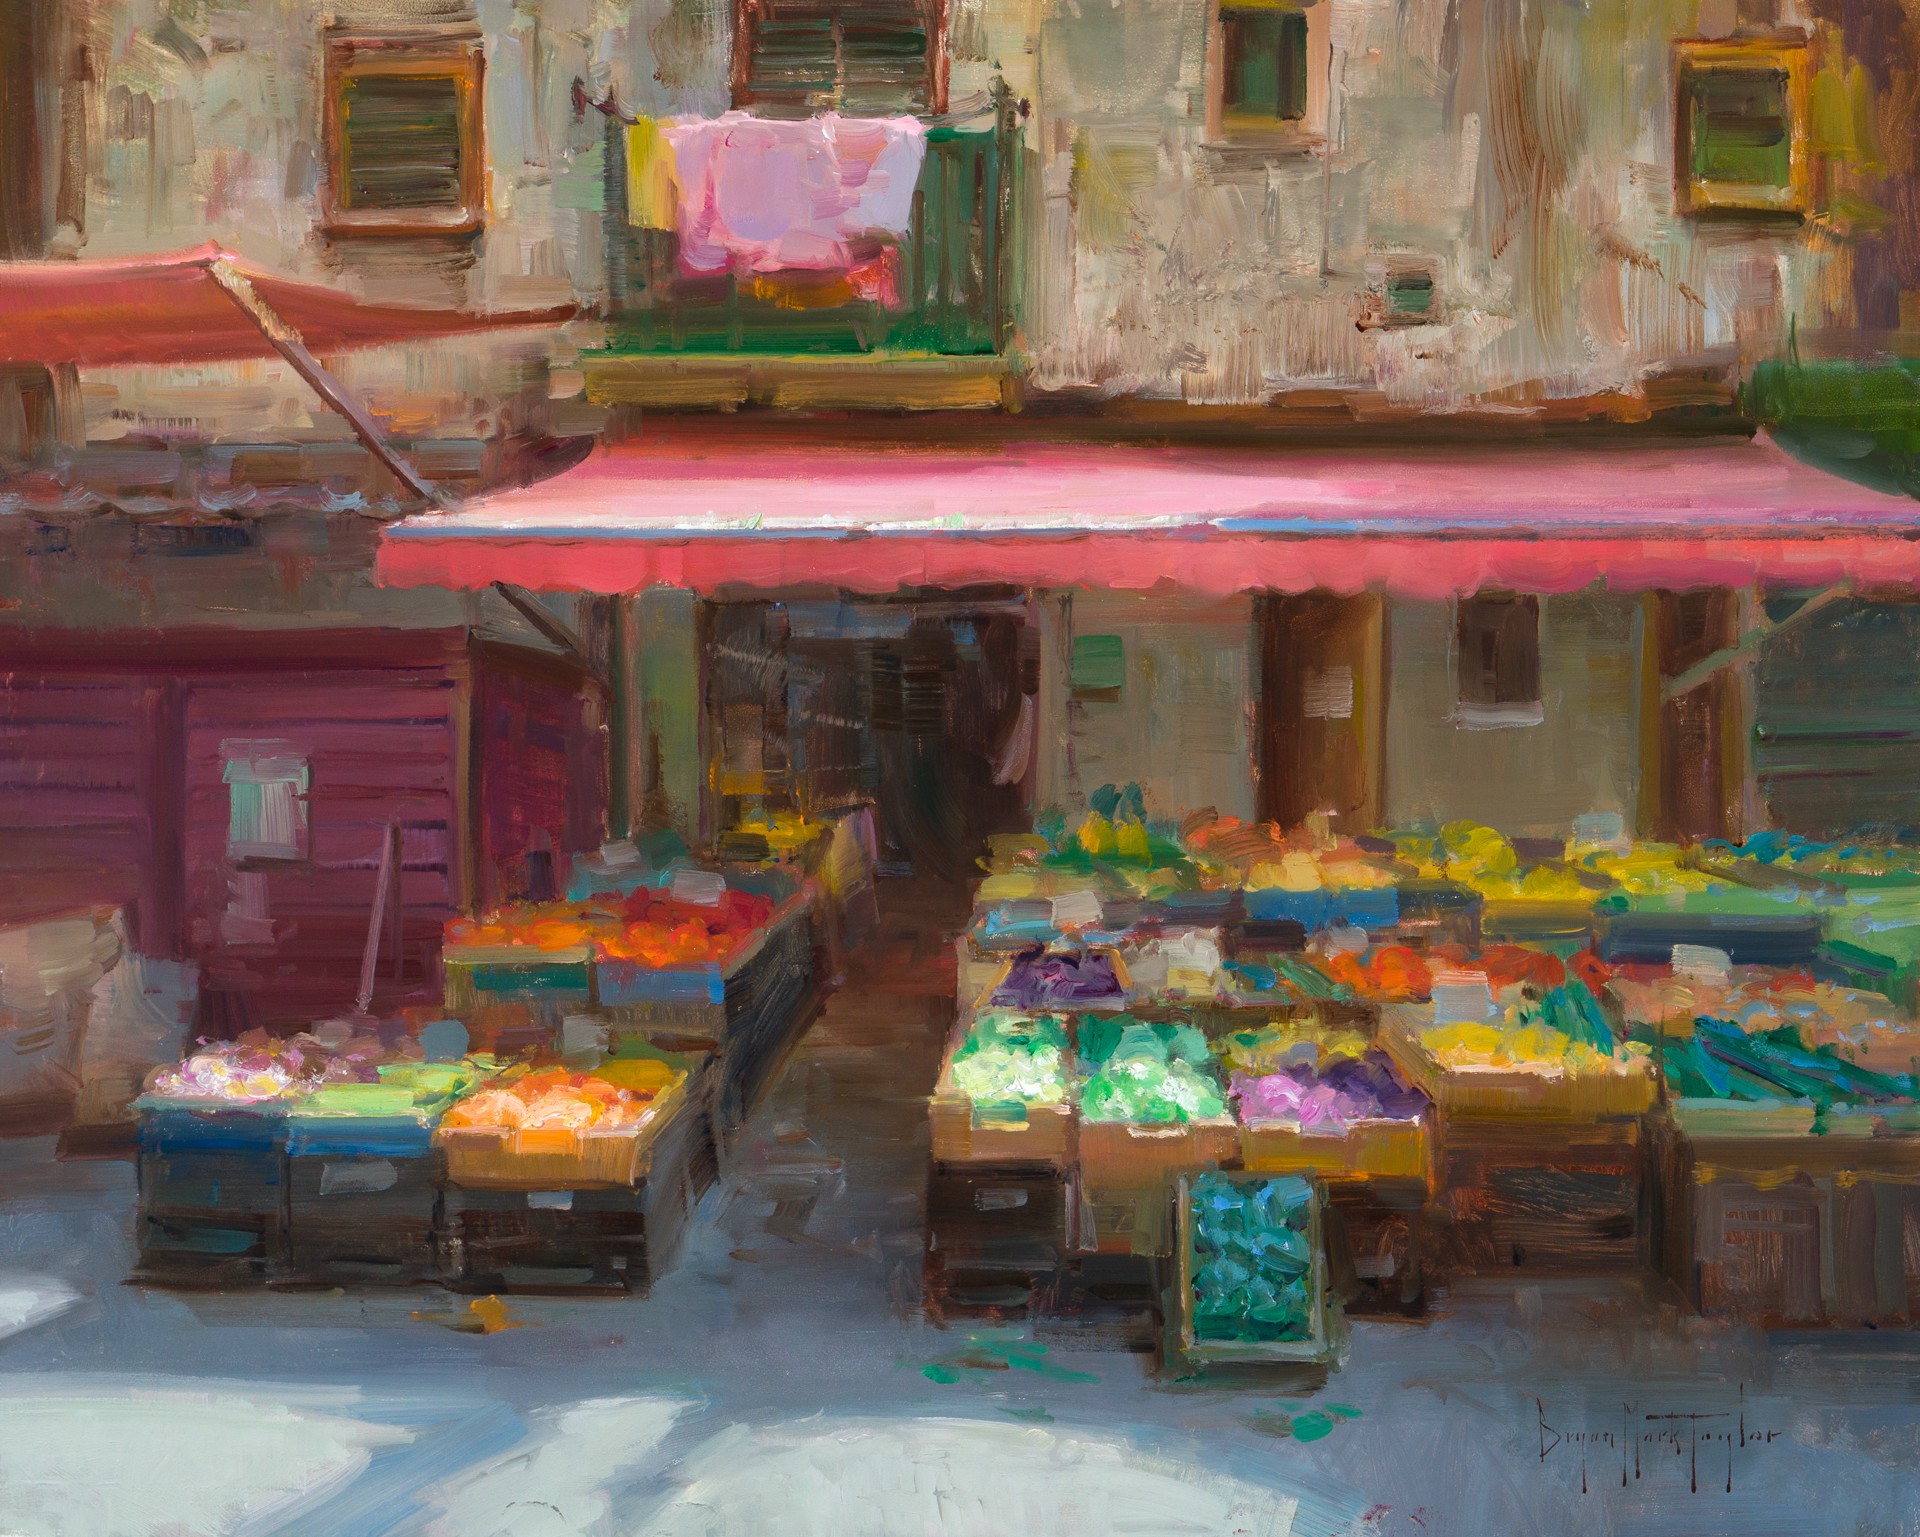 Laundry Day, Market Day by Bryan Mark Taylor